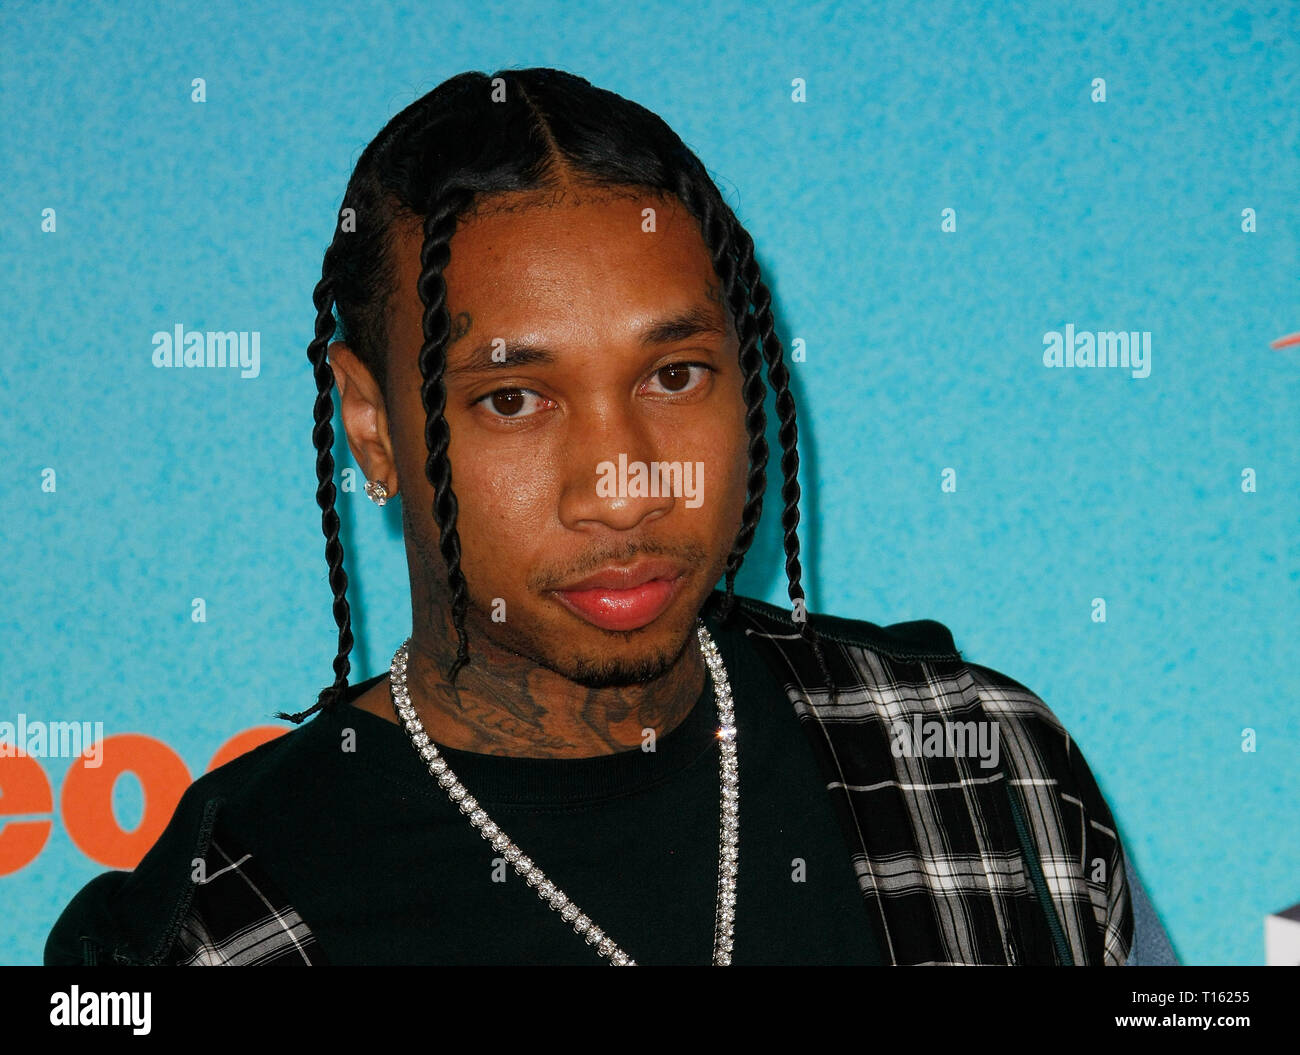 Los Angeles, USA. 23rd Mar, 2019. Tyga attends Nickelodeon's 2019 Kids' Choice Awards at Galen Center on March 23, 2019 in Los Angeles, California. Photo: imageSPACE Credit: Imagespace/Alamy Live News Stock Photo